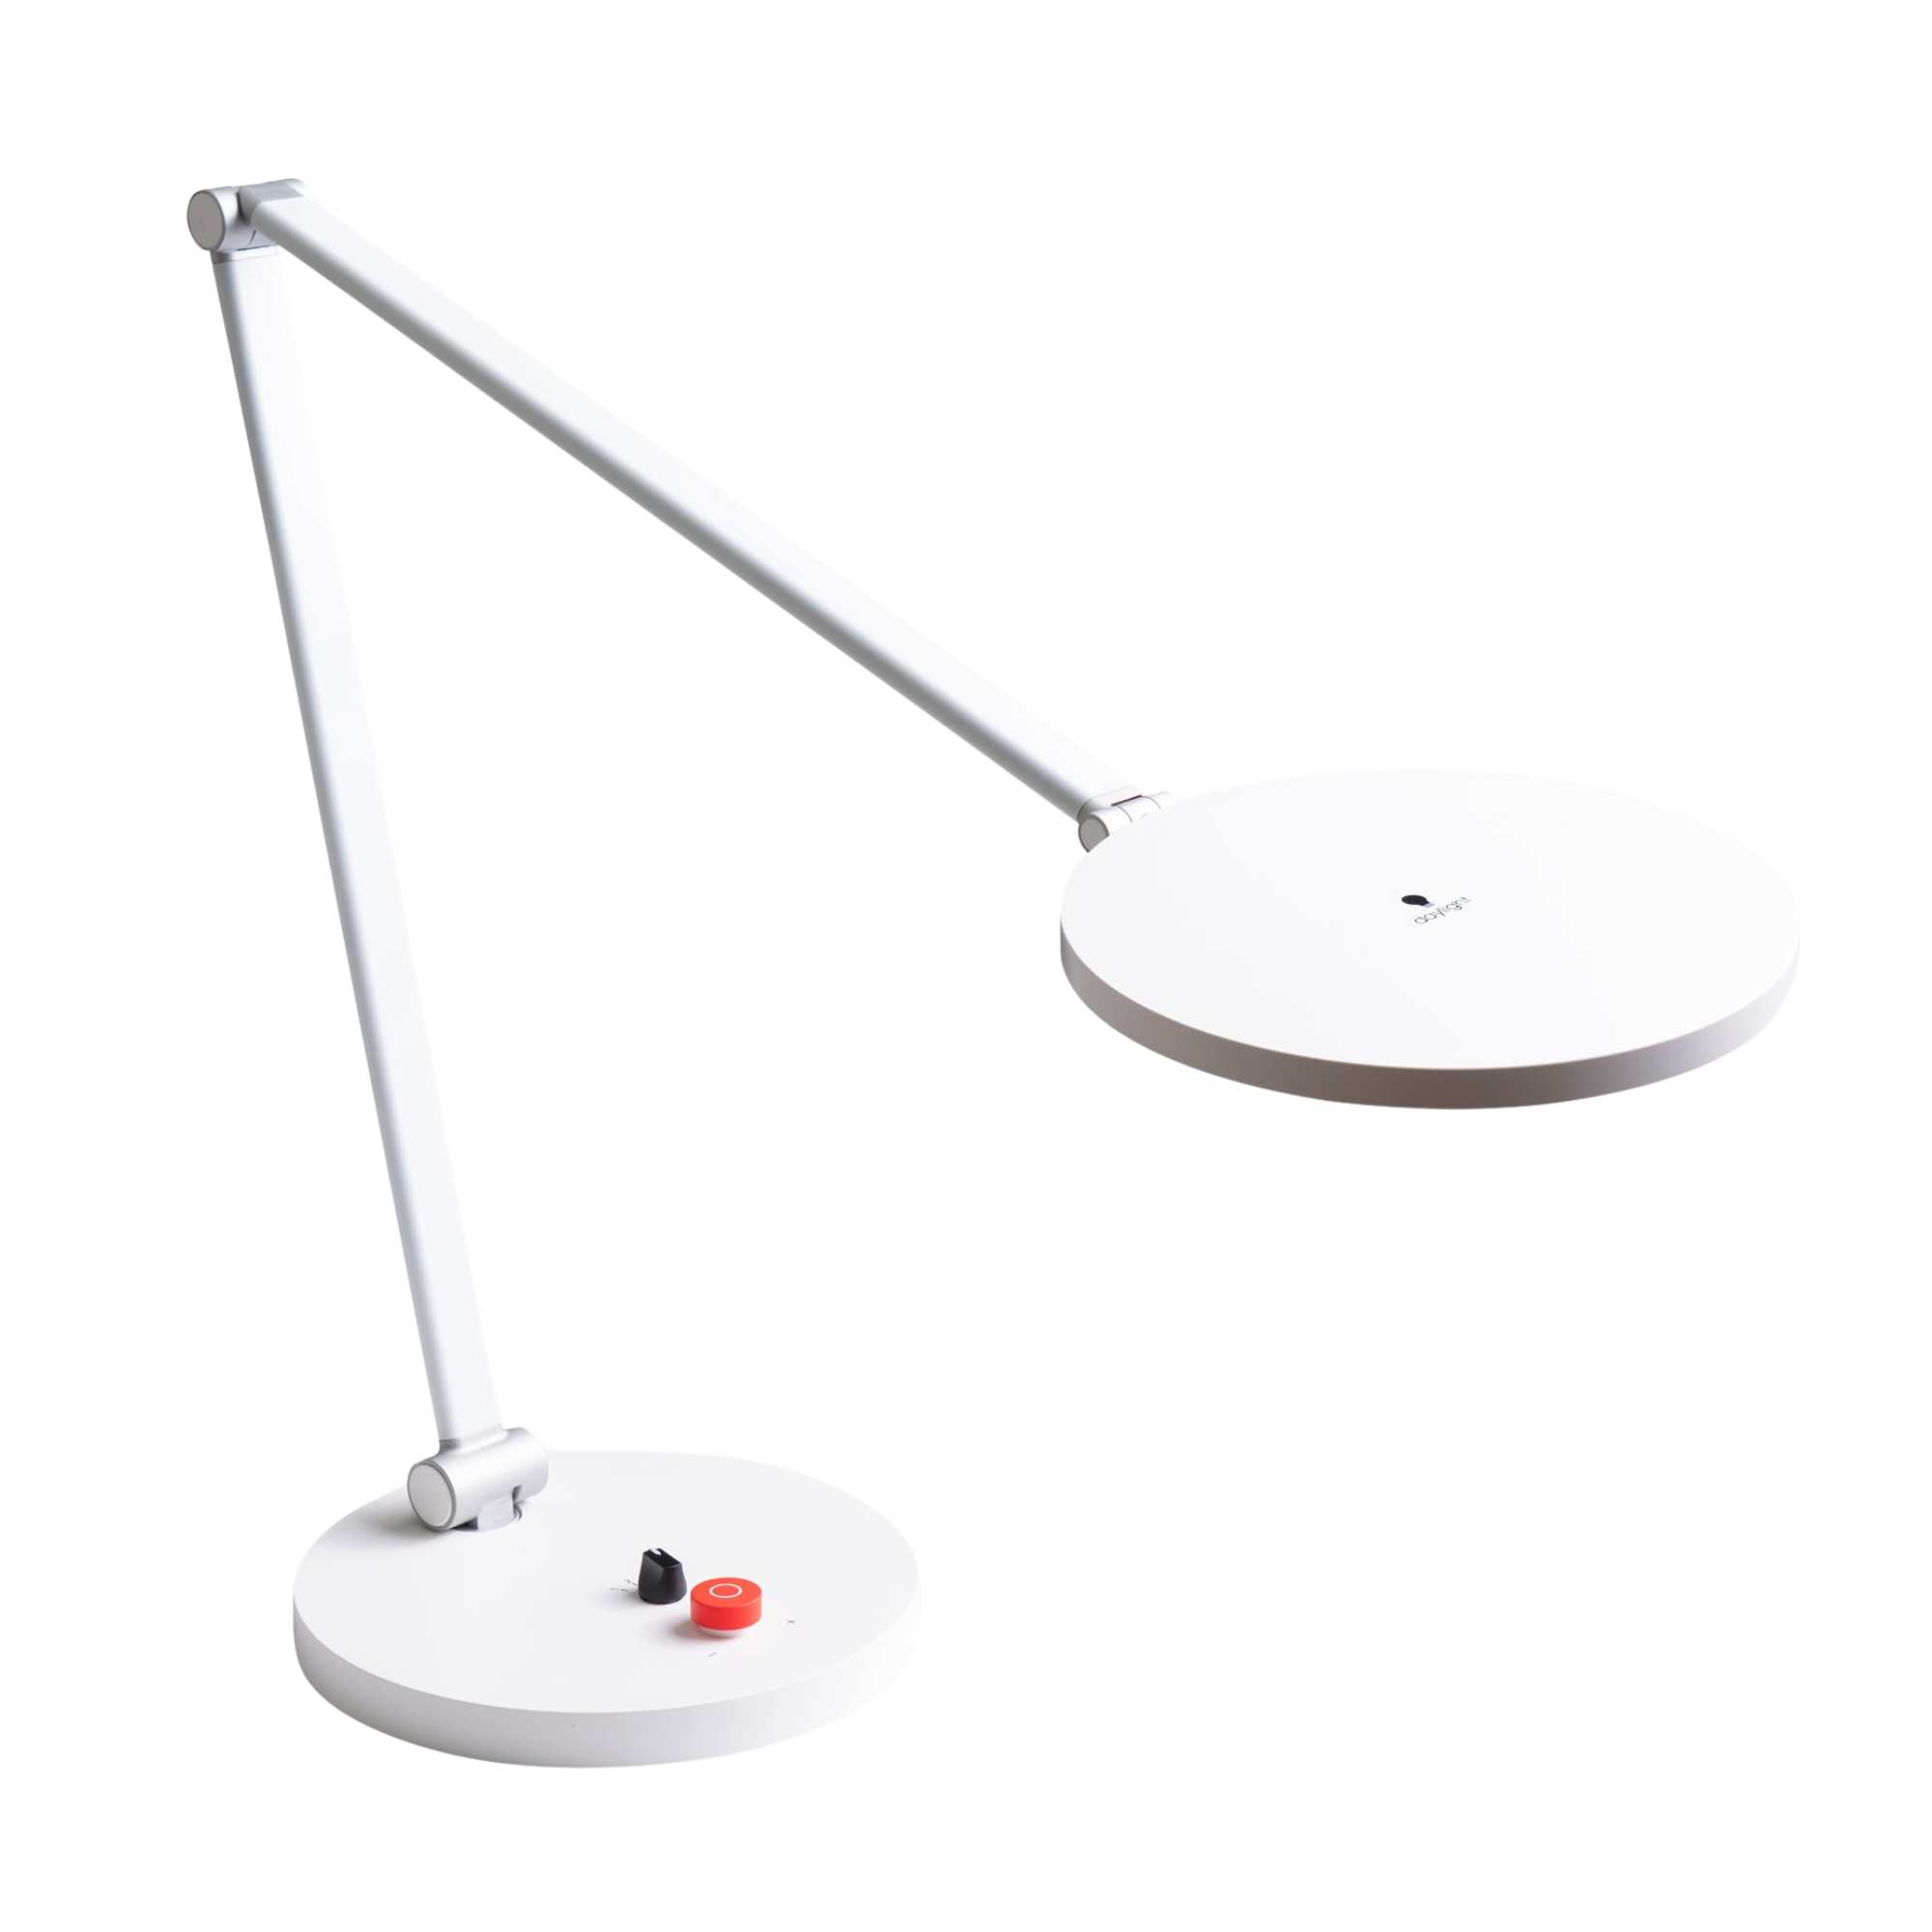 Tricolor Daylight table lighting with adjustable light temperature